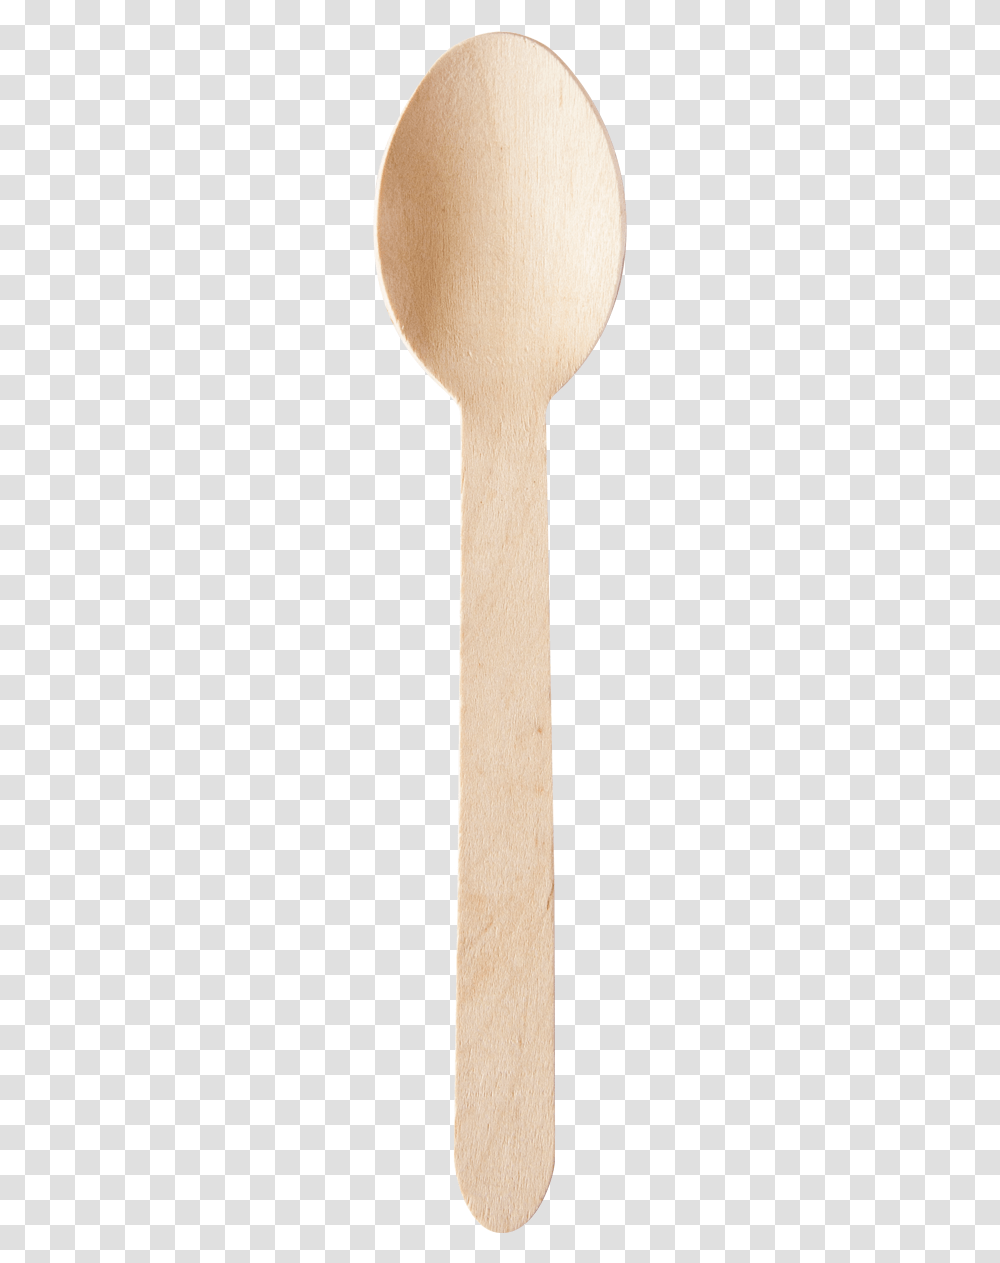 Wood, Spoon, Cutlery, Plywood, Tabletop Transparent Png